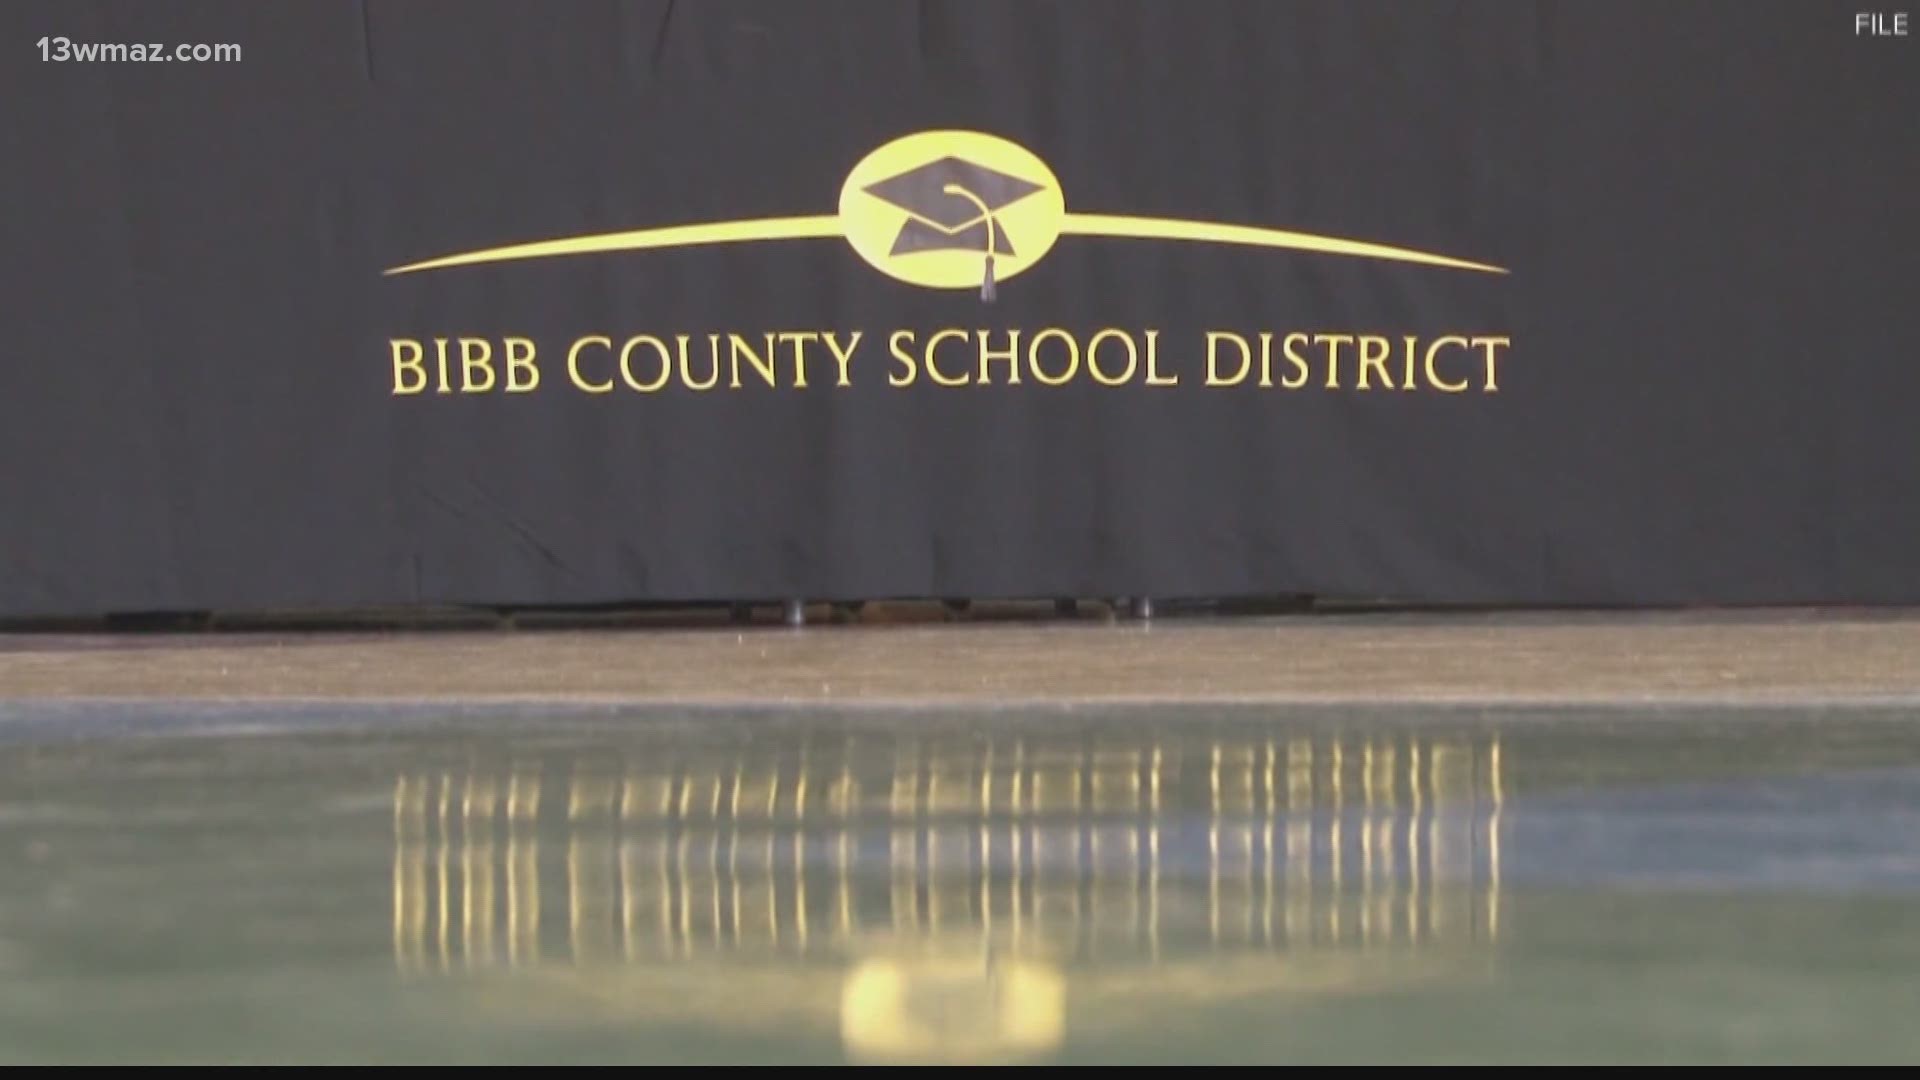 Bibb County Schools started classes virtually last week. Parents and Superintendent Curtis Jones talk about what's going well